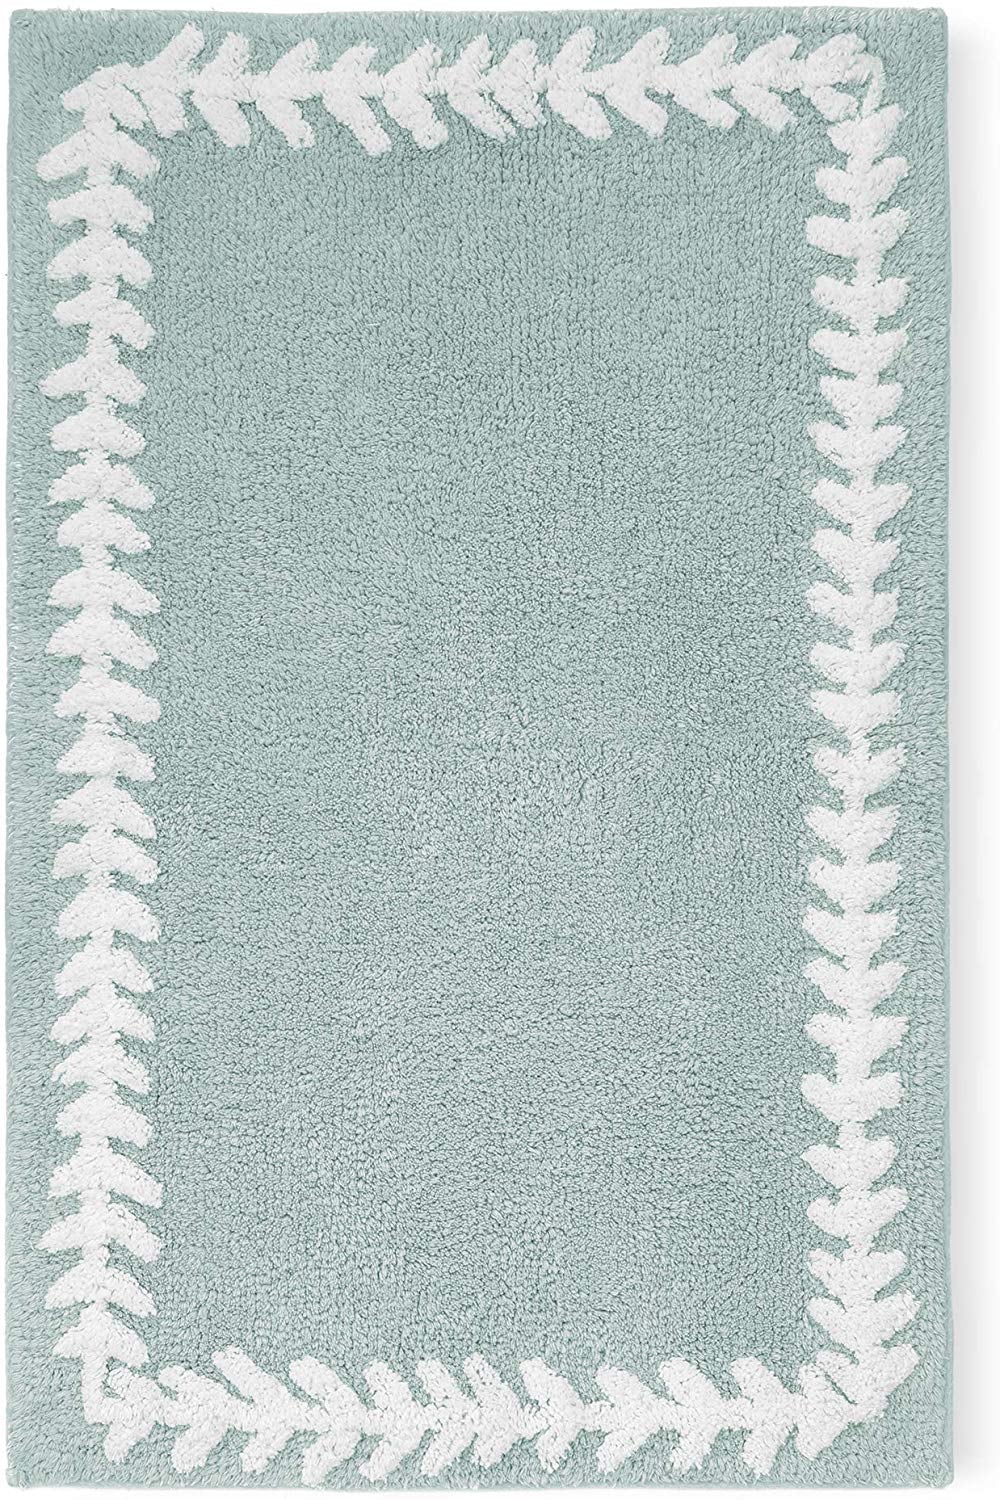 Kate Spade New York Fern Trellis 21x34 Turq Bath Rug | 15 Stylish Home  Accent Pieces You Can Buy on Amazon | POPSUGAR Home Photo 10